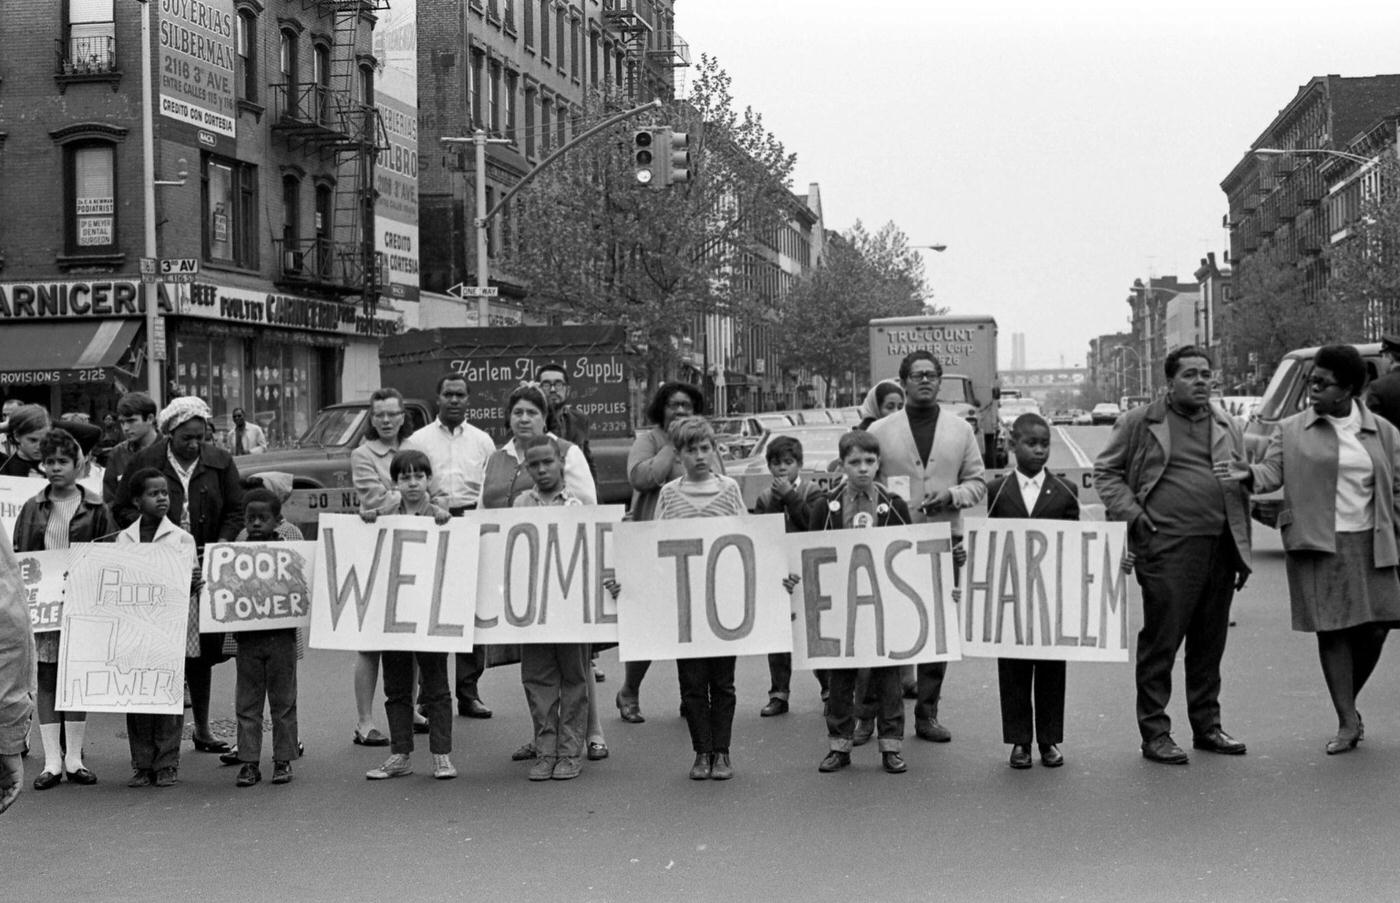 Residents Hold A 'Welcome To East Harlem' Sign To Greet The Arriving Poor People'S Campaign March, Manhattan, 1968